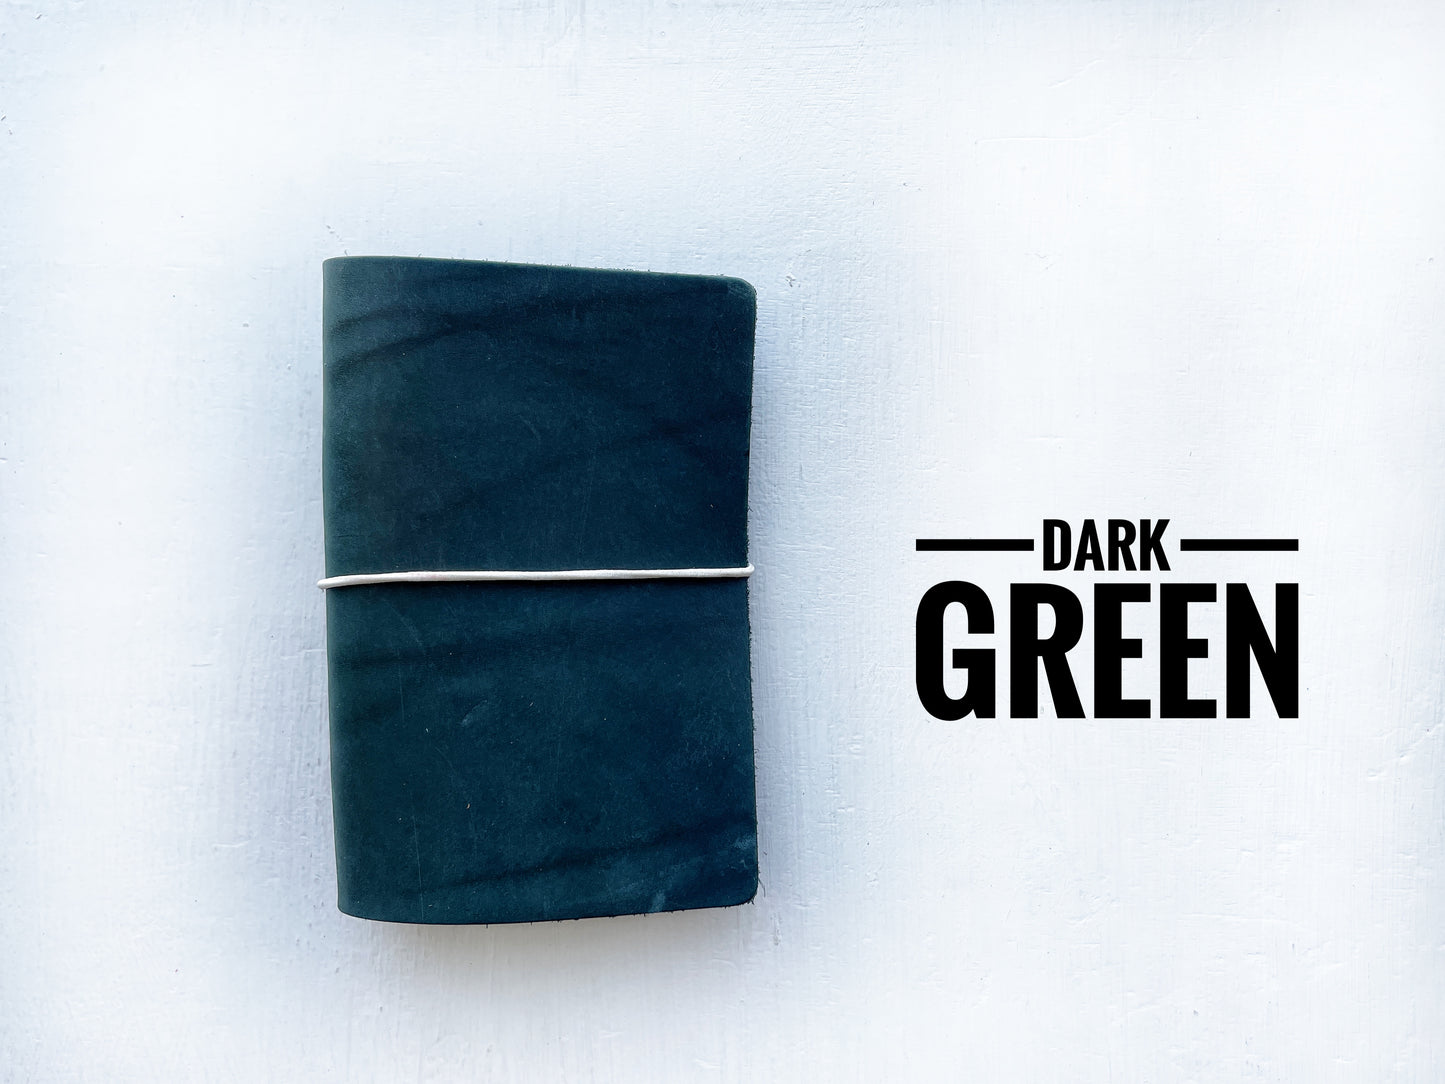 DARK GREEN LEATHER COVER